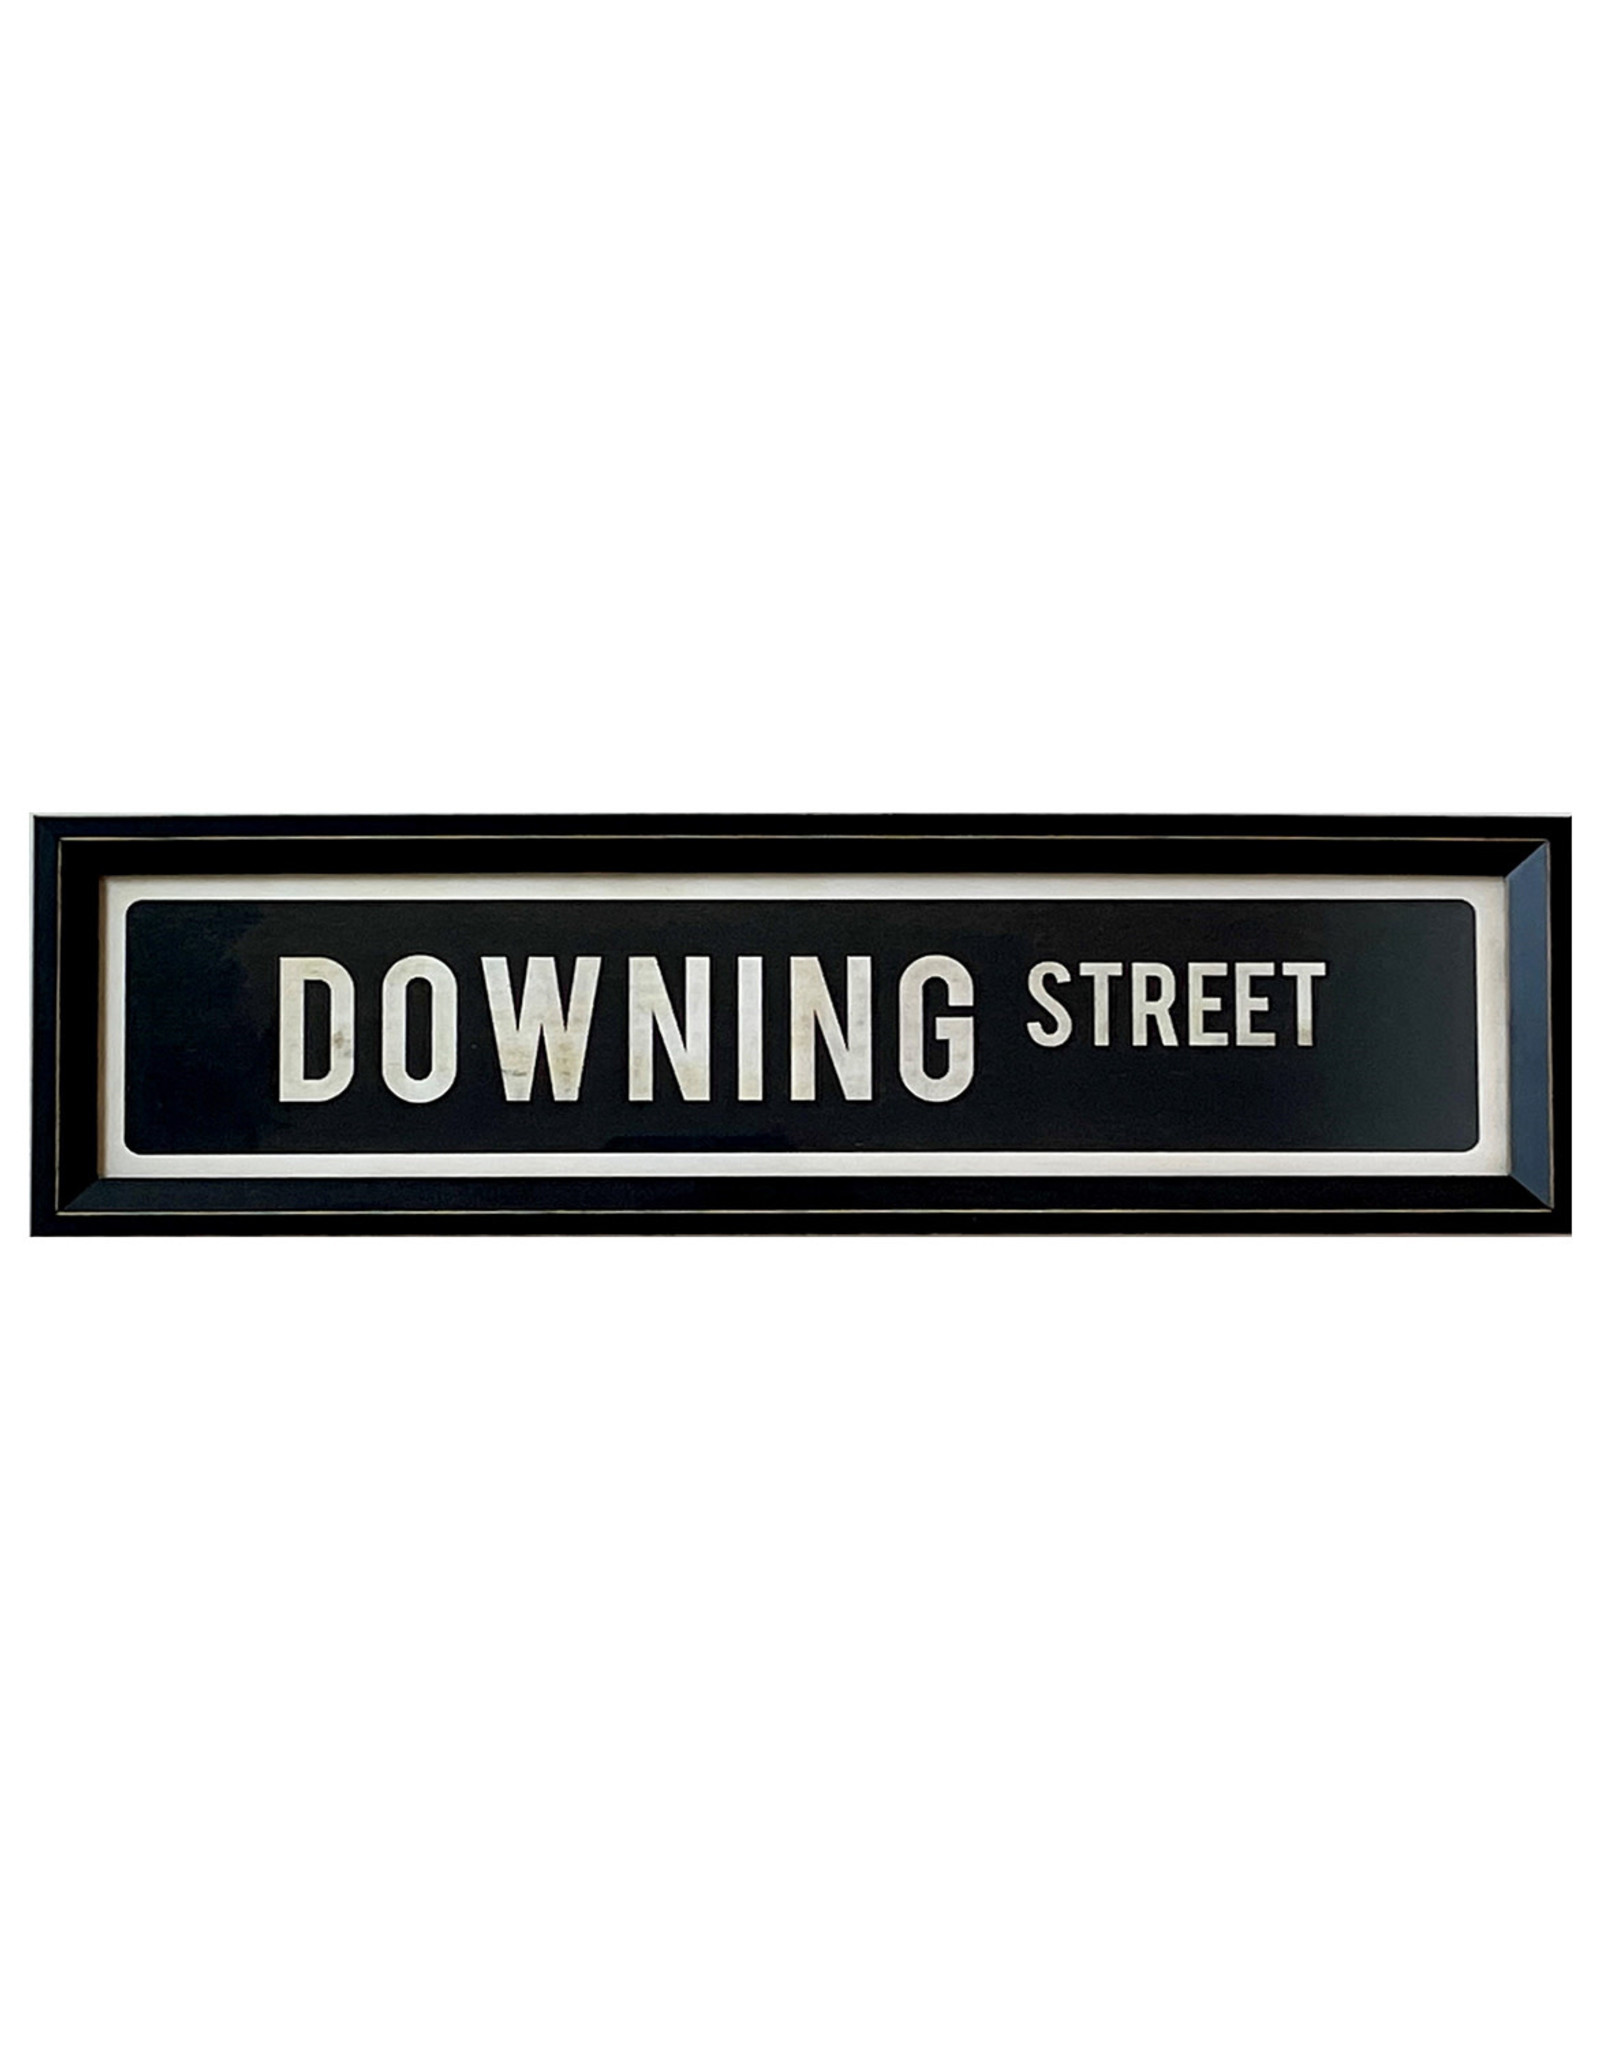 Downing Street - Framed Picture